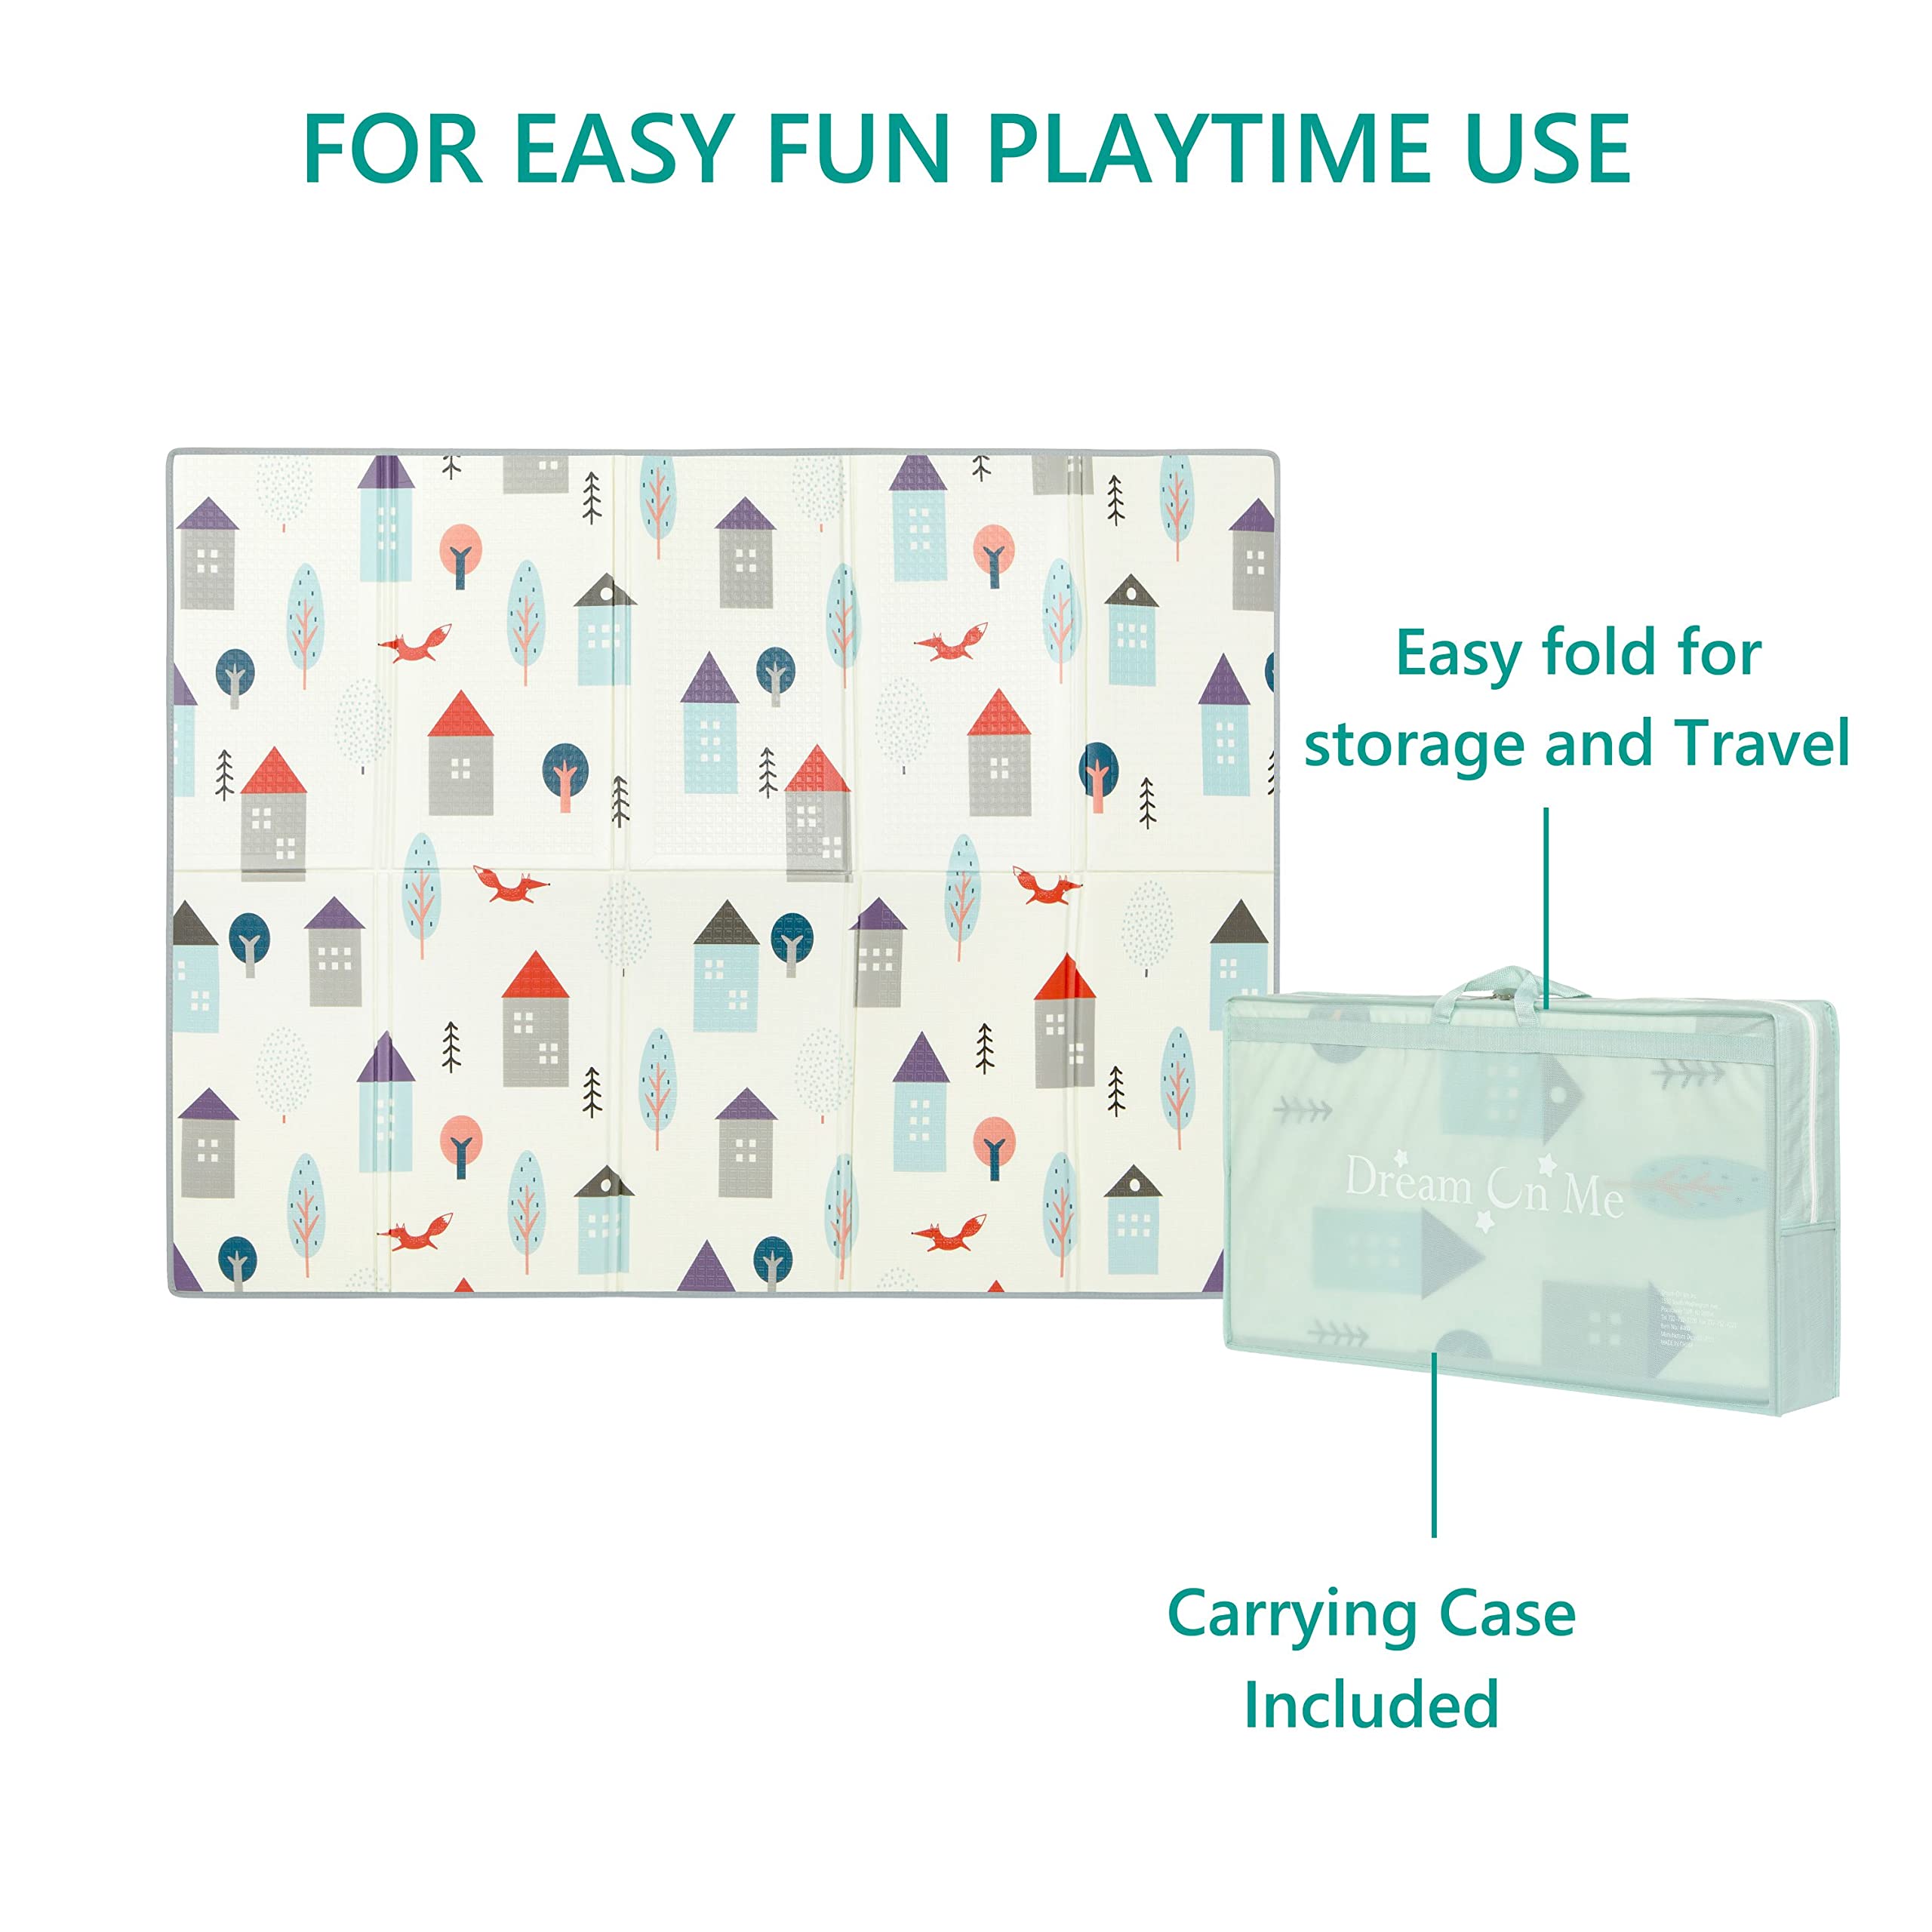 Dream On Me Play Time Reversible Baby Play Mat |Foldable Extra Large Thick Foam Crawling Playmats for Toddlers| Waterproof Portable Playmat for Babies | Yoga/Picnic/Game Mat| Indoor/Outdoor, Multi